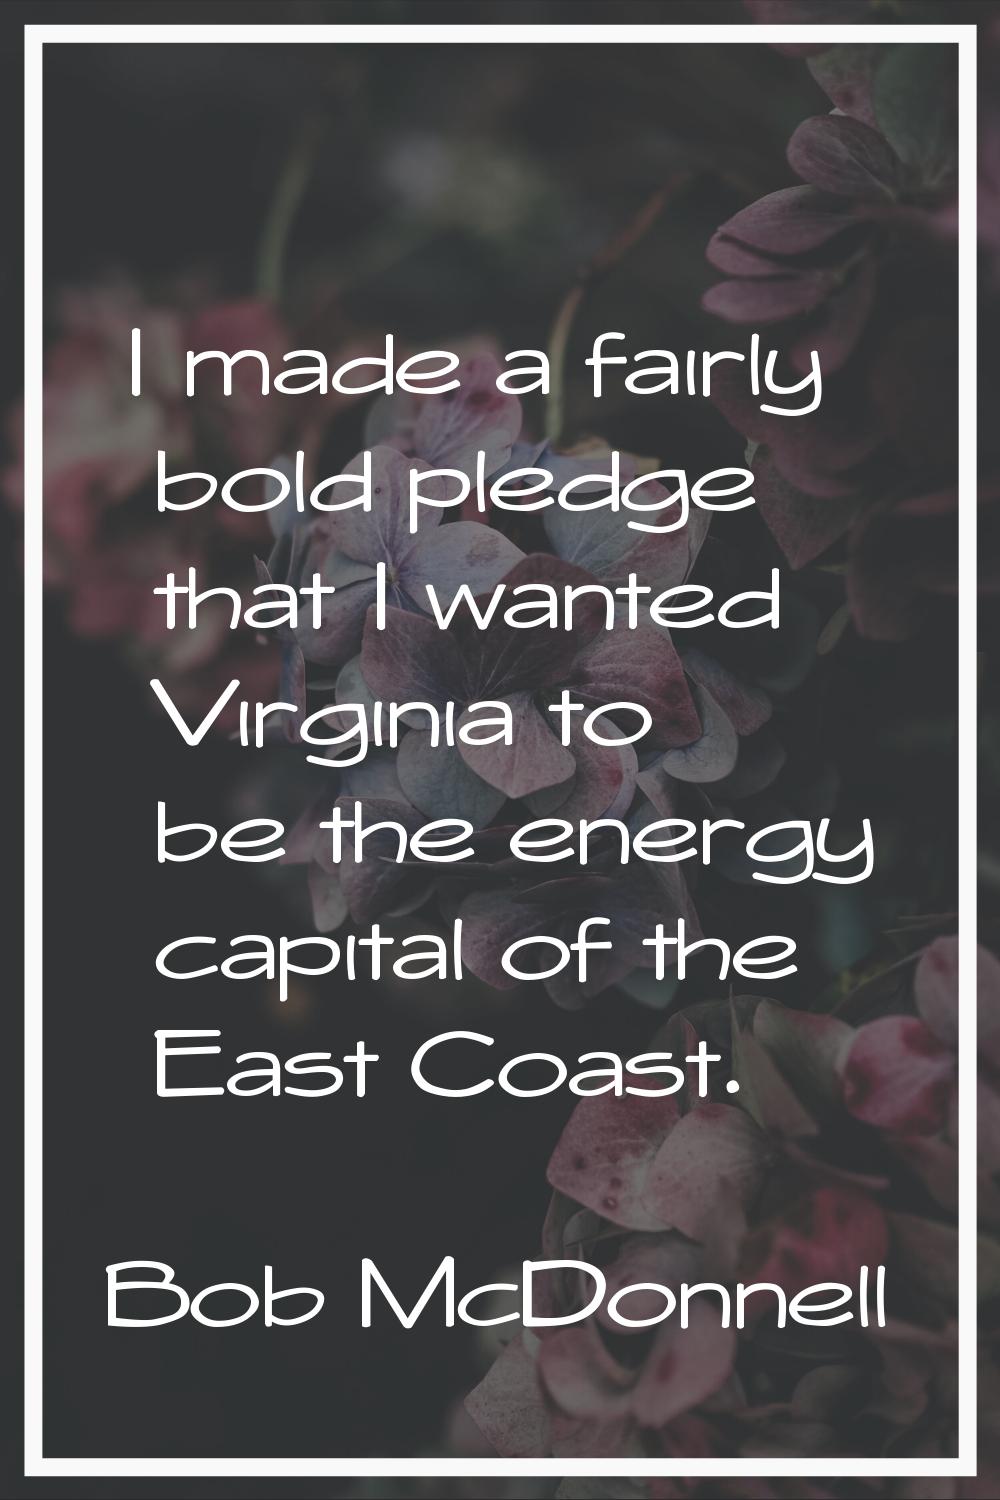 I made a fairly bold pledge that I wanted Virginia to be the energy capital of the East Coast.